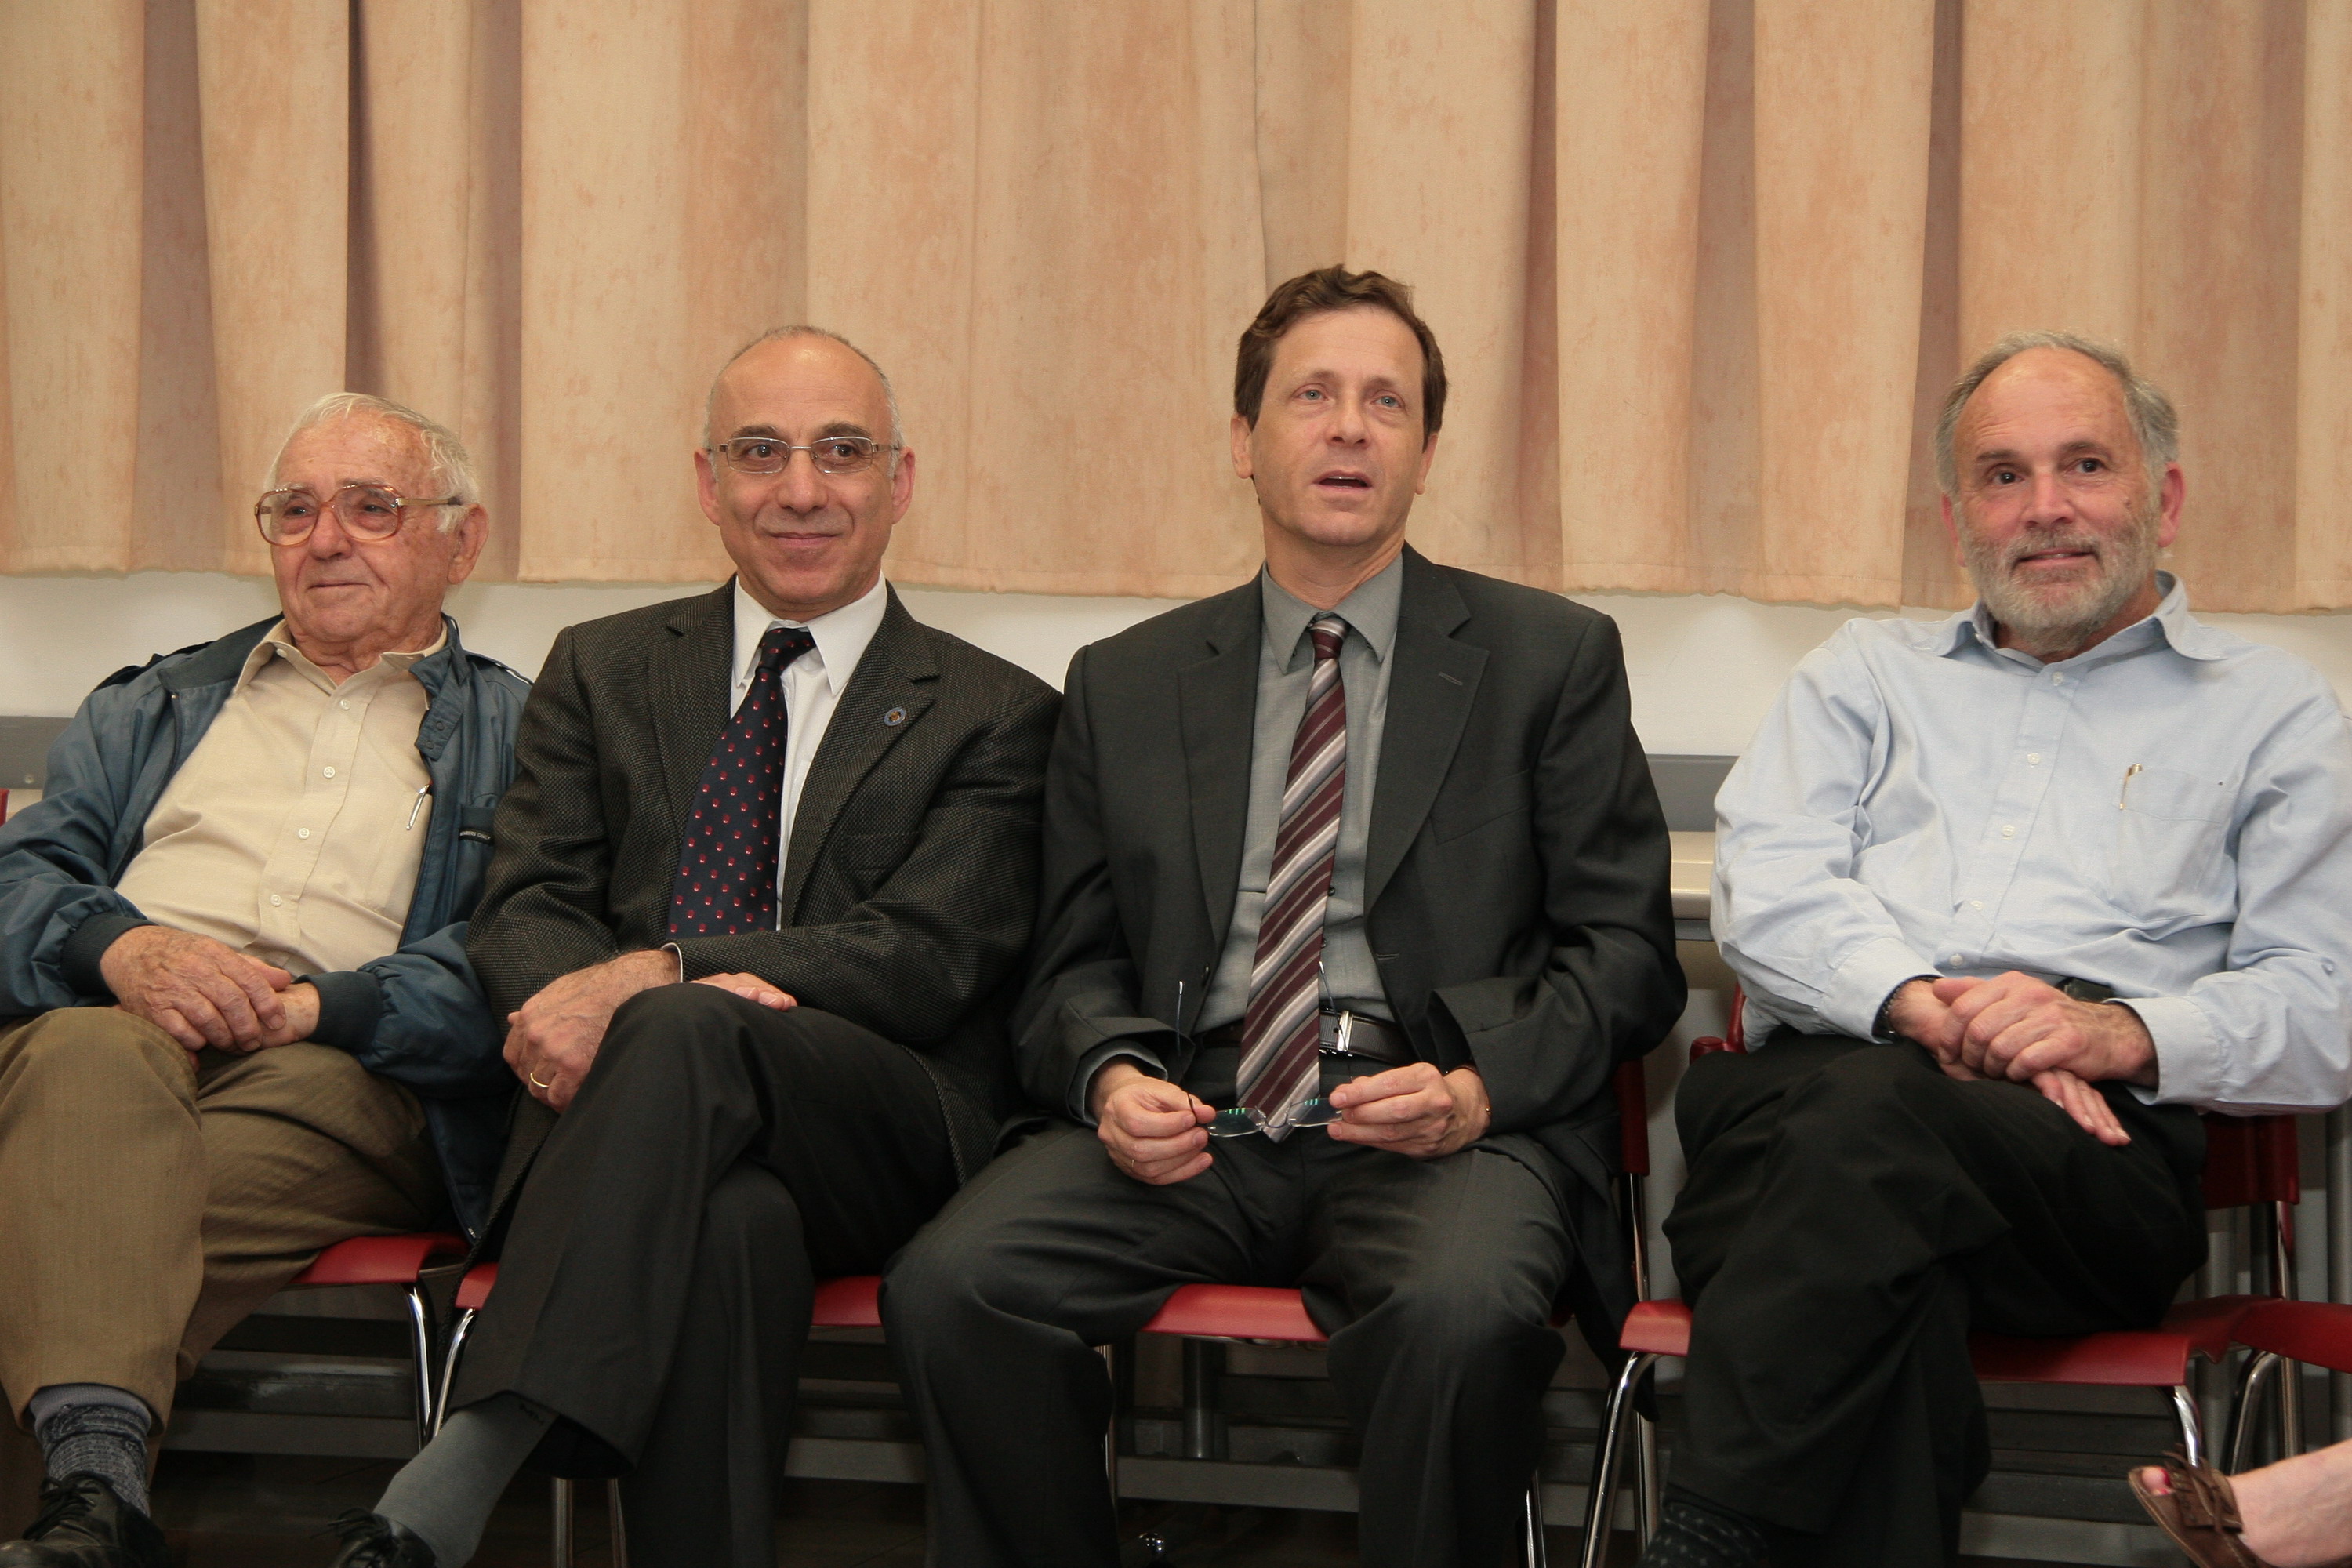 From right to left: The Technion's Vice President for Foreign Relations and Resource Development, Professor Rafi Rom, Minister Herzog, the Technion's Senior Vice President, Professor Paul Feigin, and Maj. Gen. (res.) Amos Horev, former Technion President and currently Chairman of the Technion's Association of Demanders in Israel. Photo: Yoav Bacher , spokeswoman for the Technion.